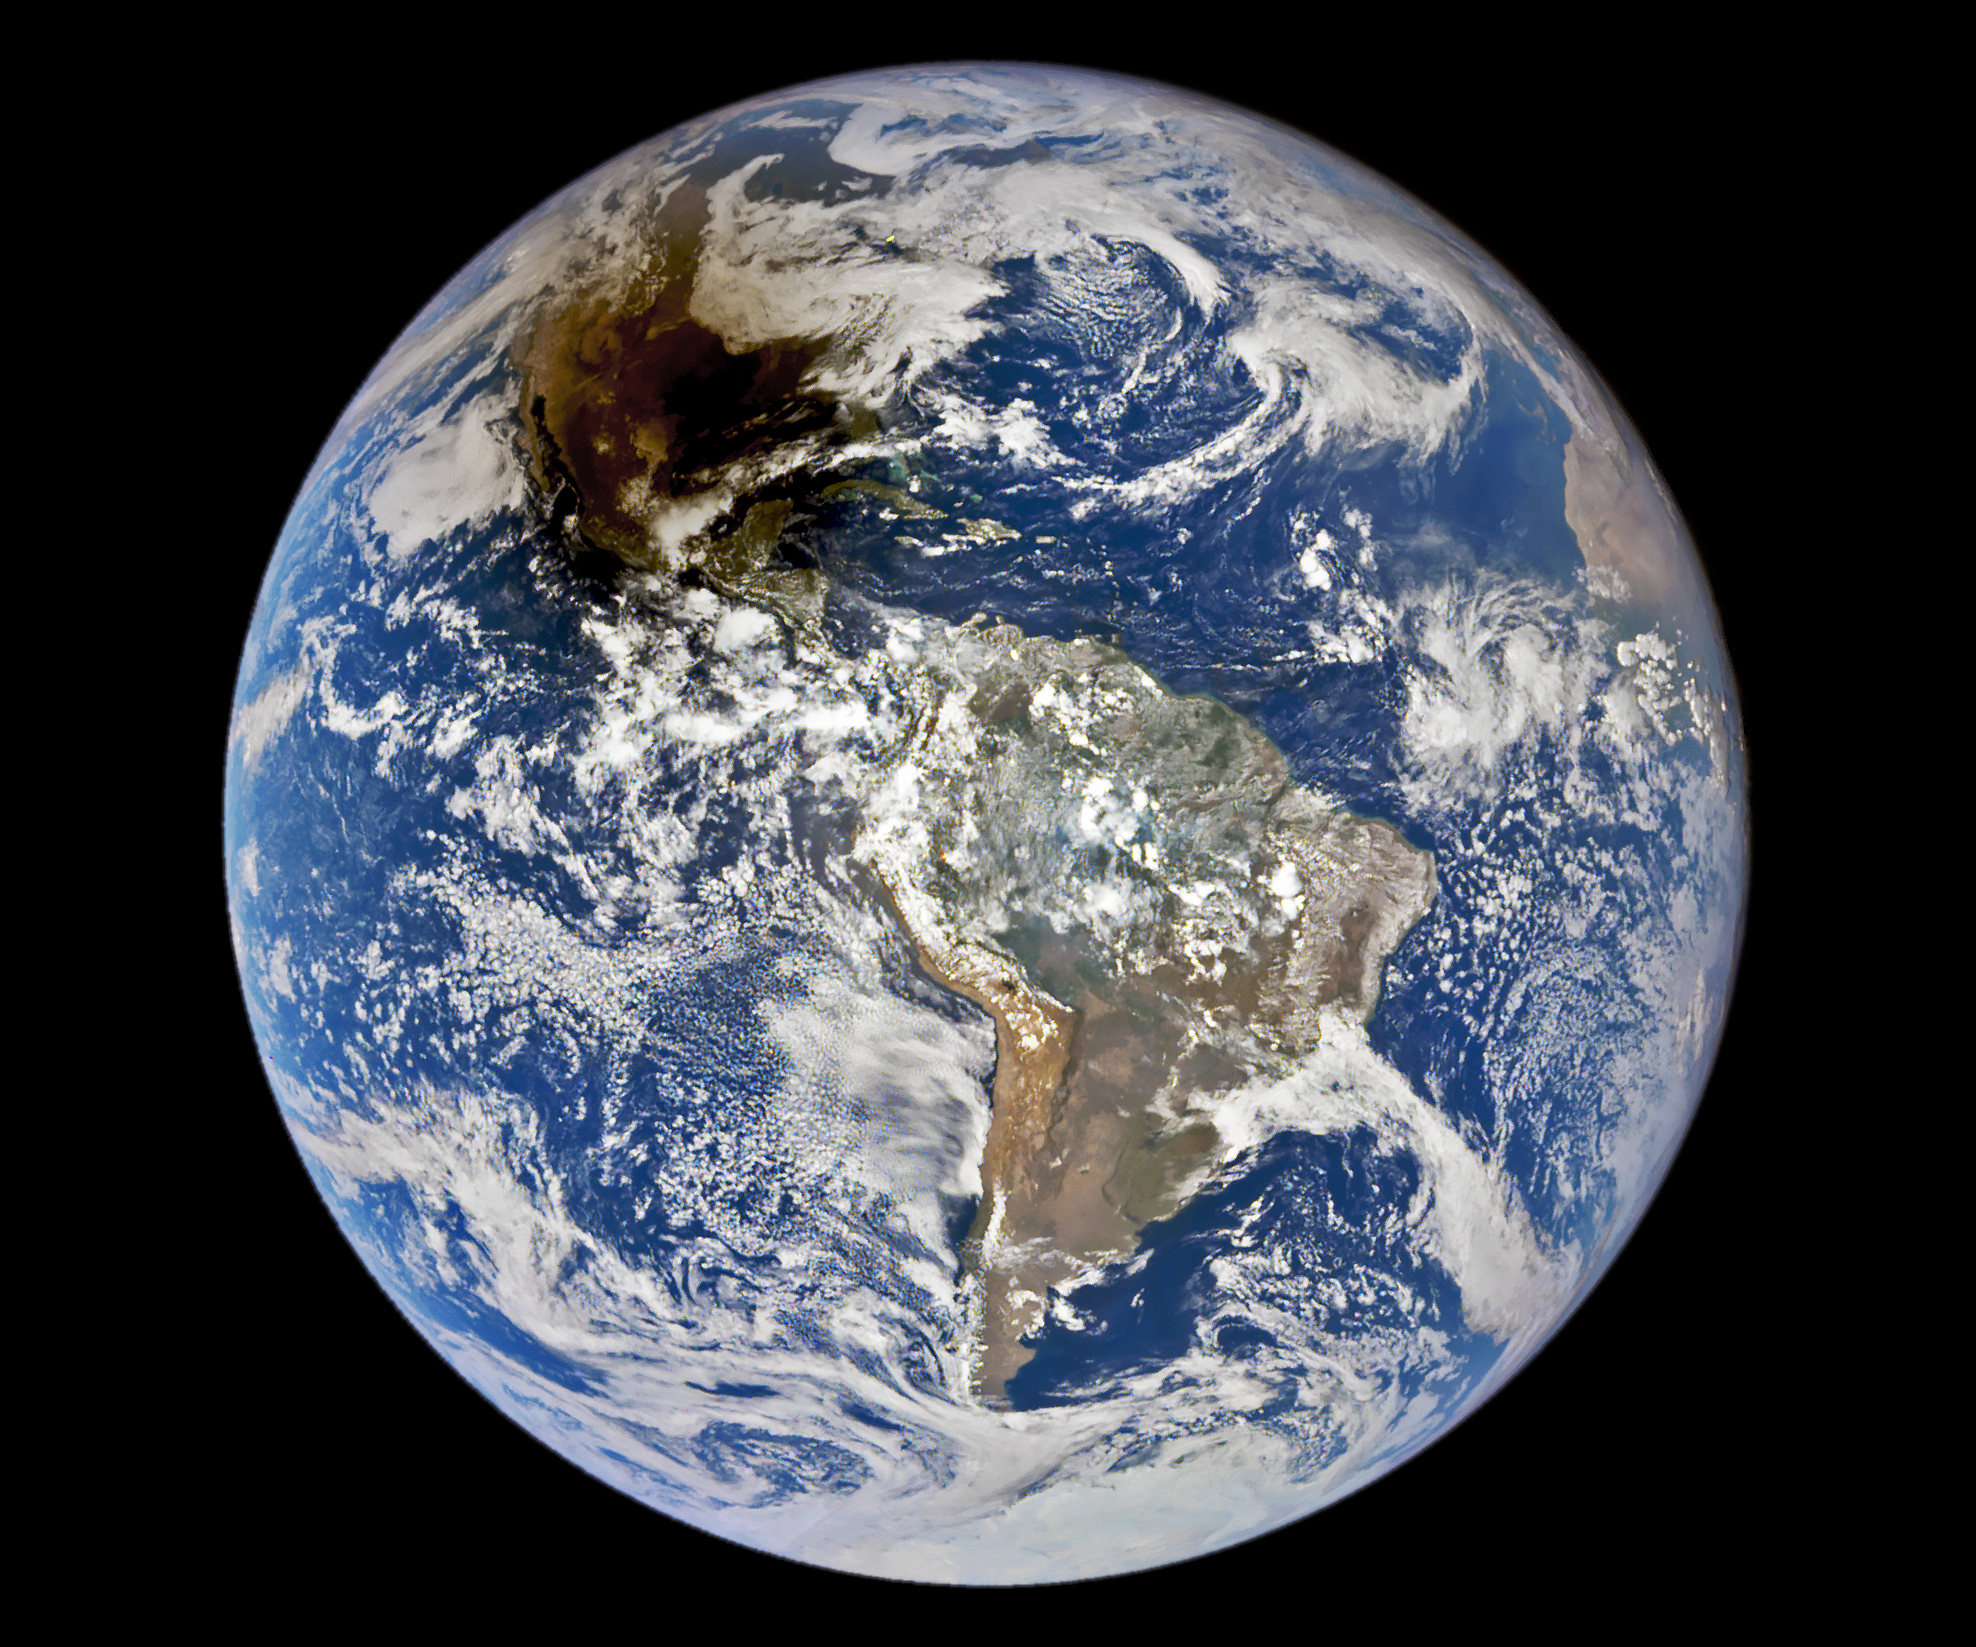 image of the entire earth in black space. a dark black/brown shadow can be seen across the united states.